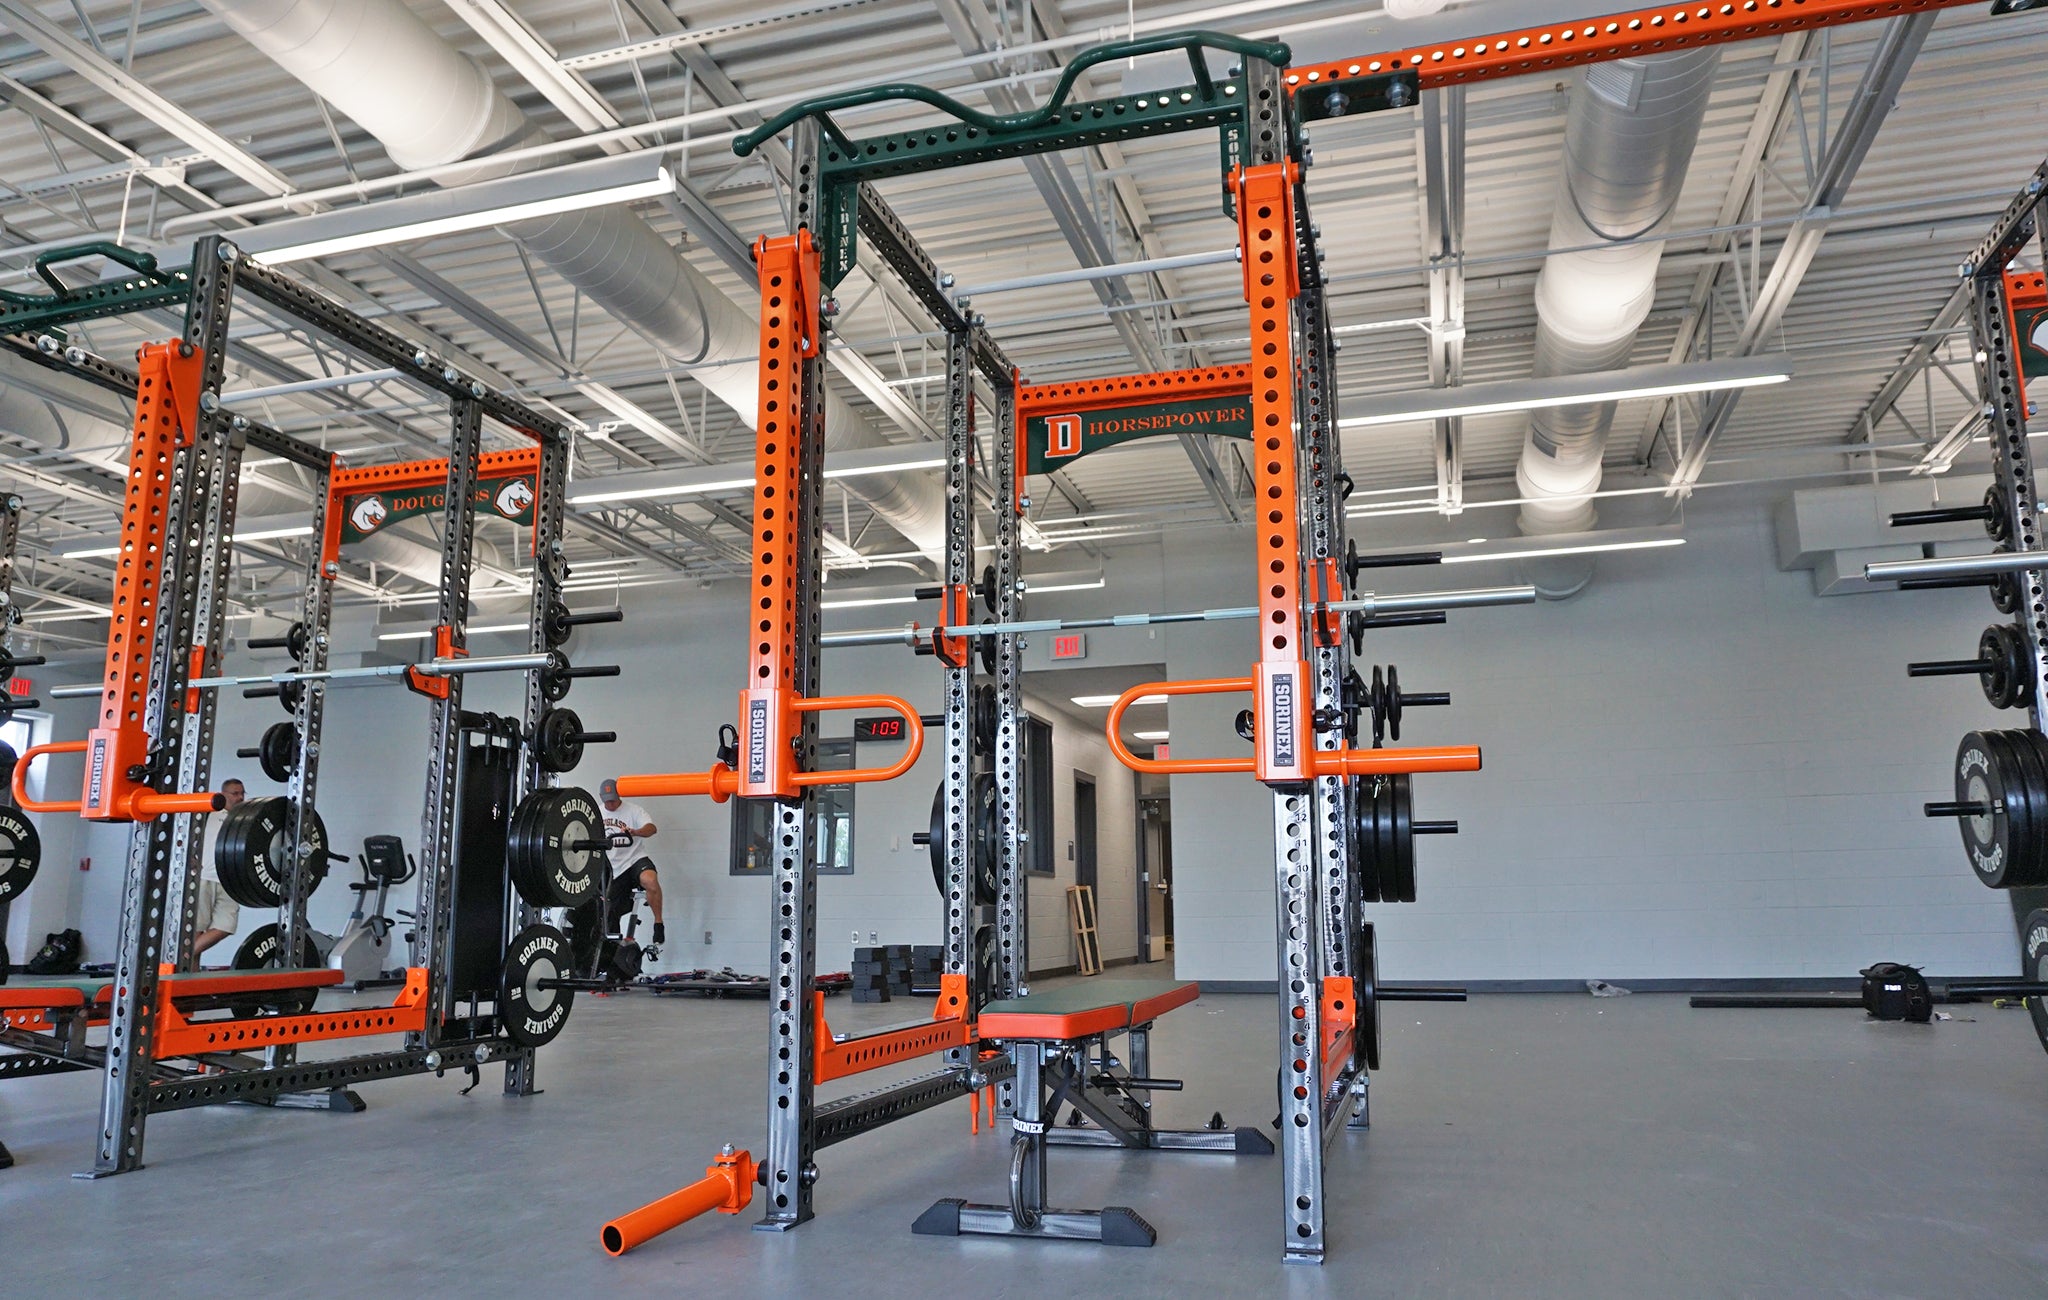 Frederick Douglass High School strength and conditioning